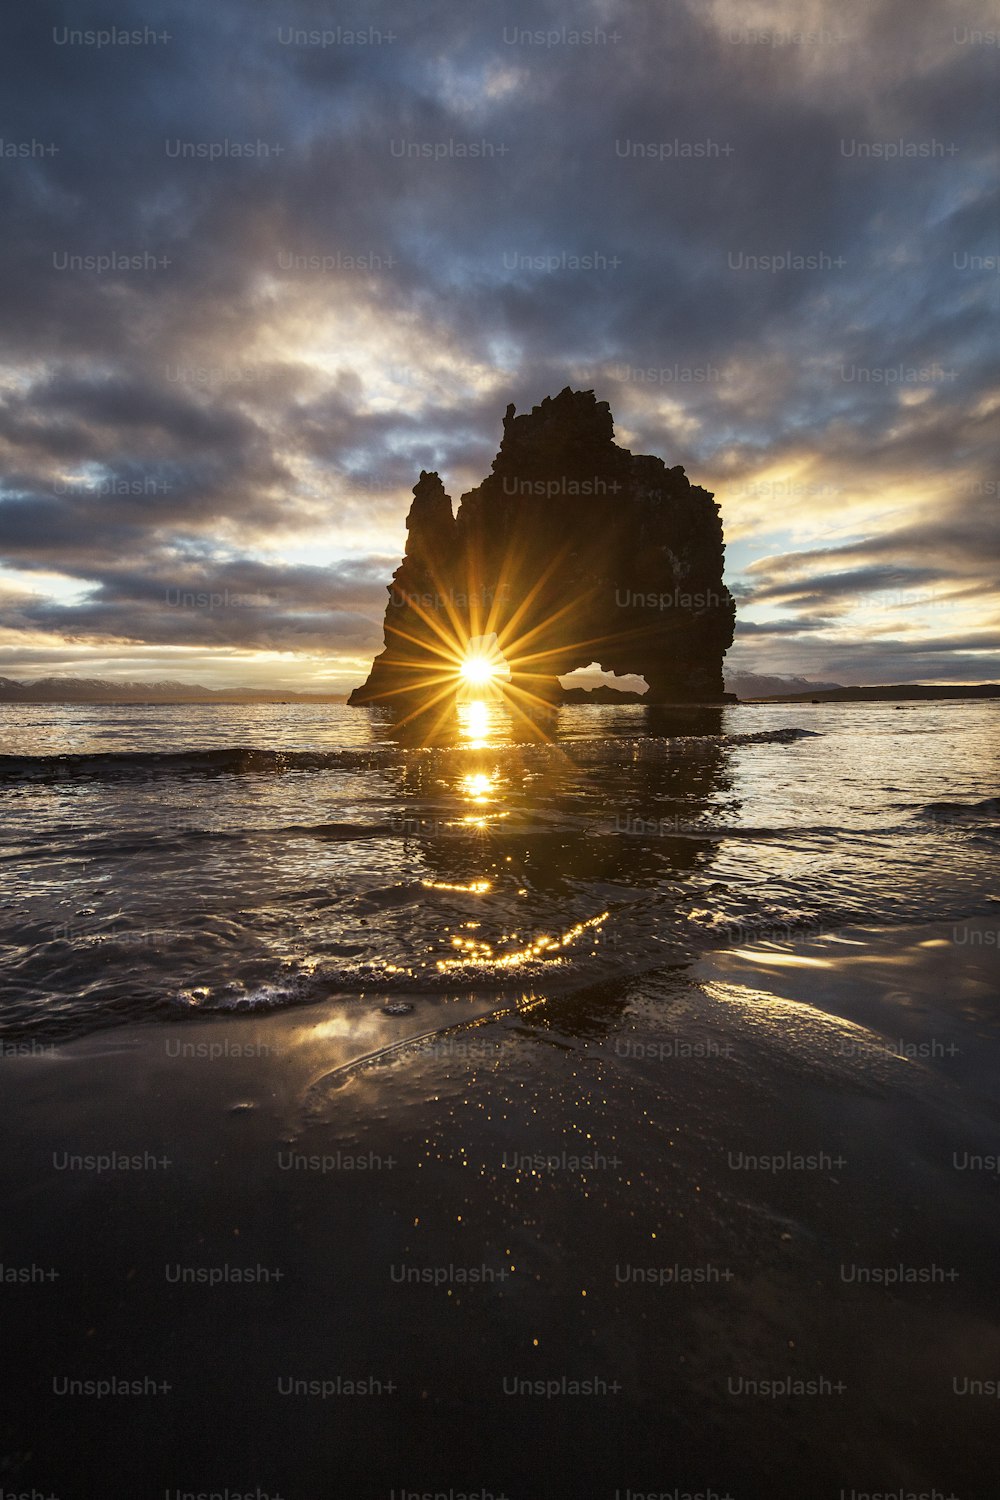 the sun is setting behind a rock in the ocean